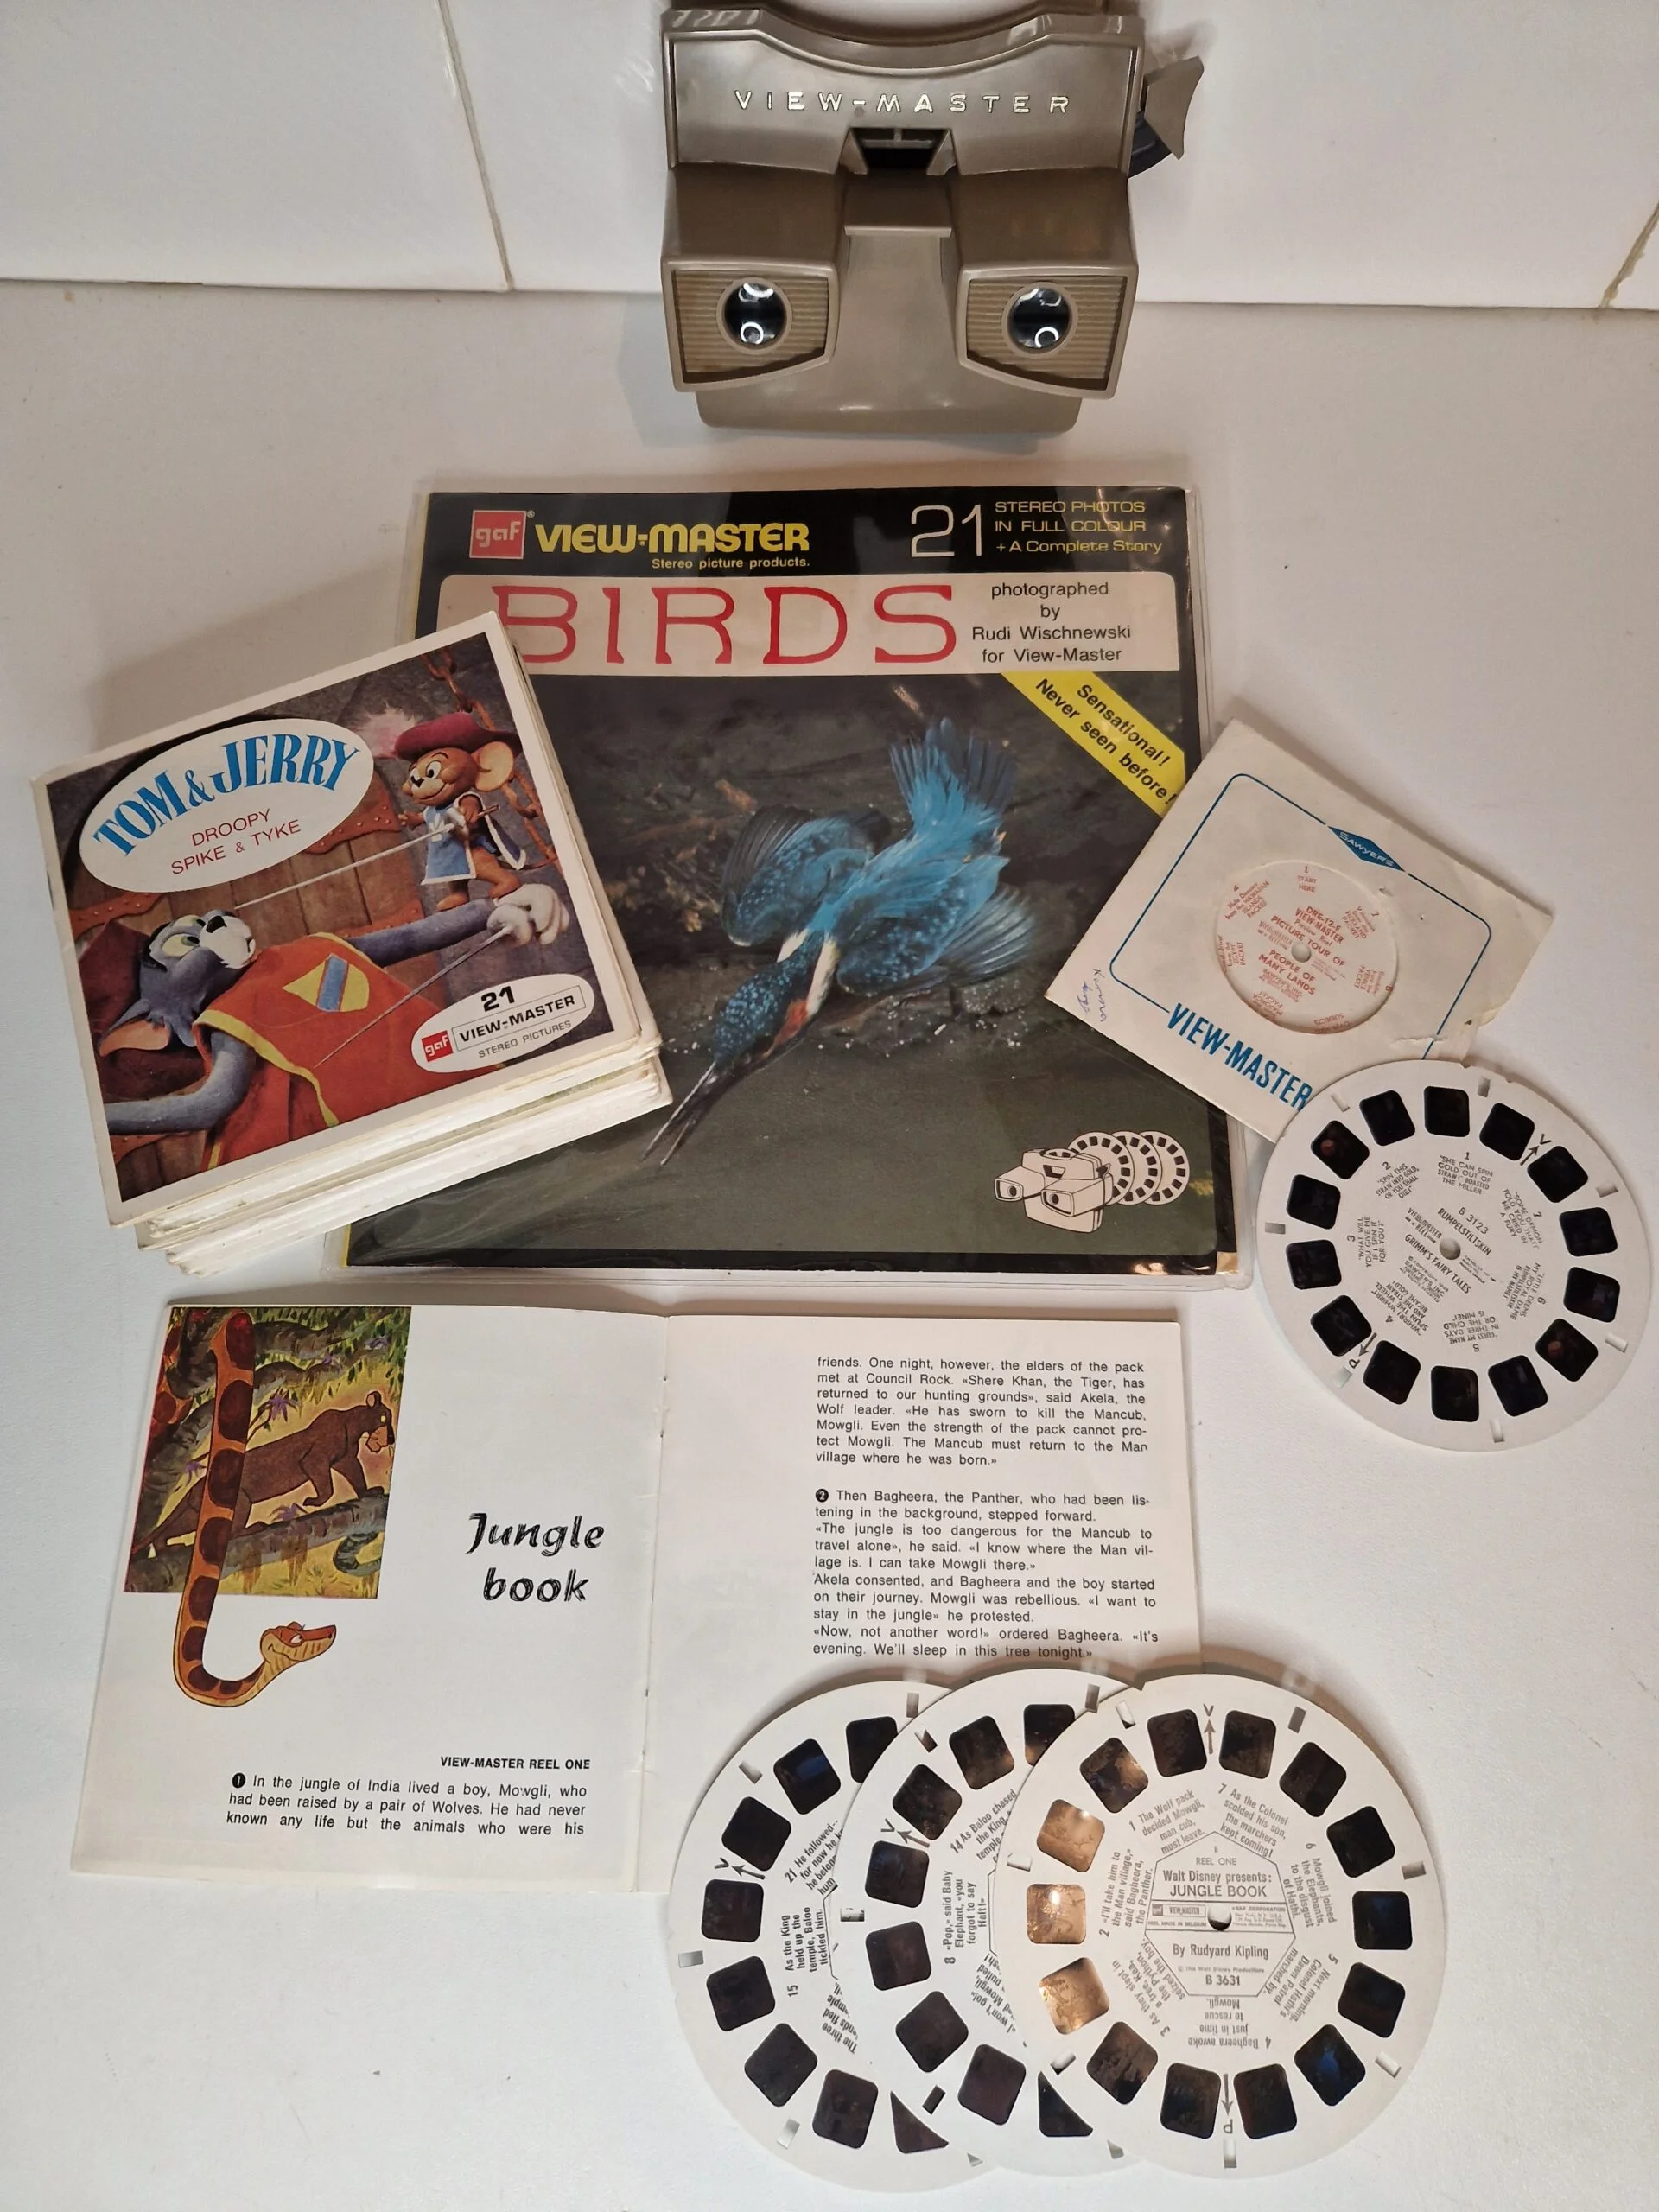 View Master with a collection of picture discs